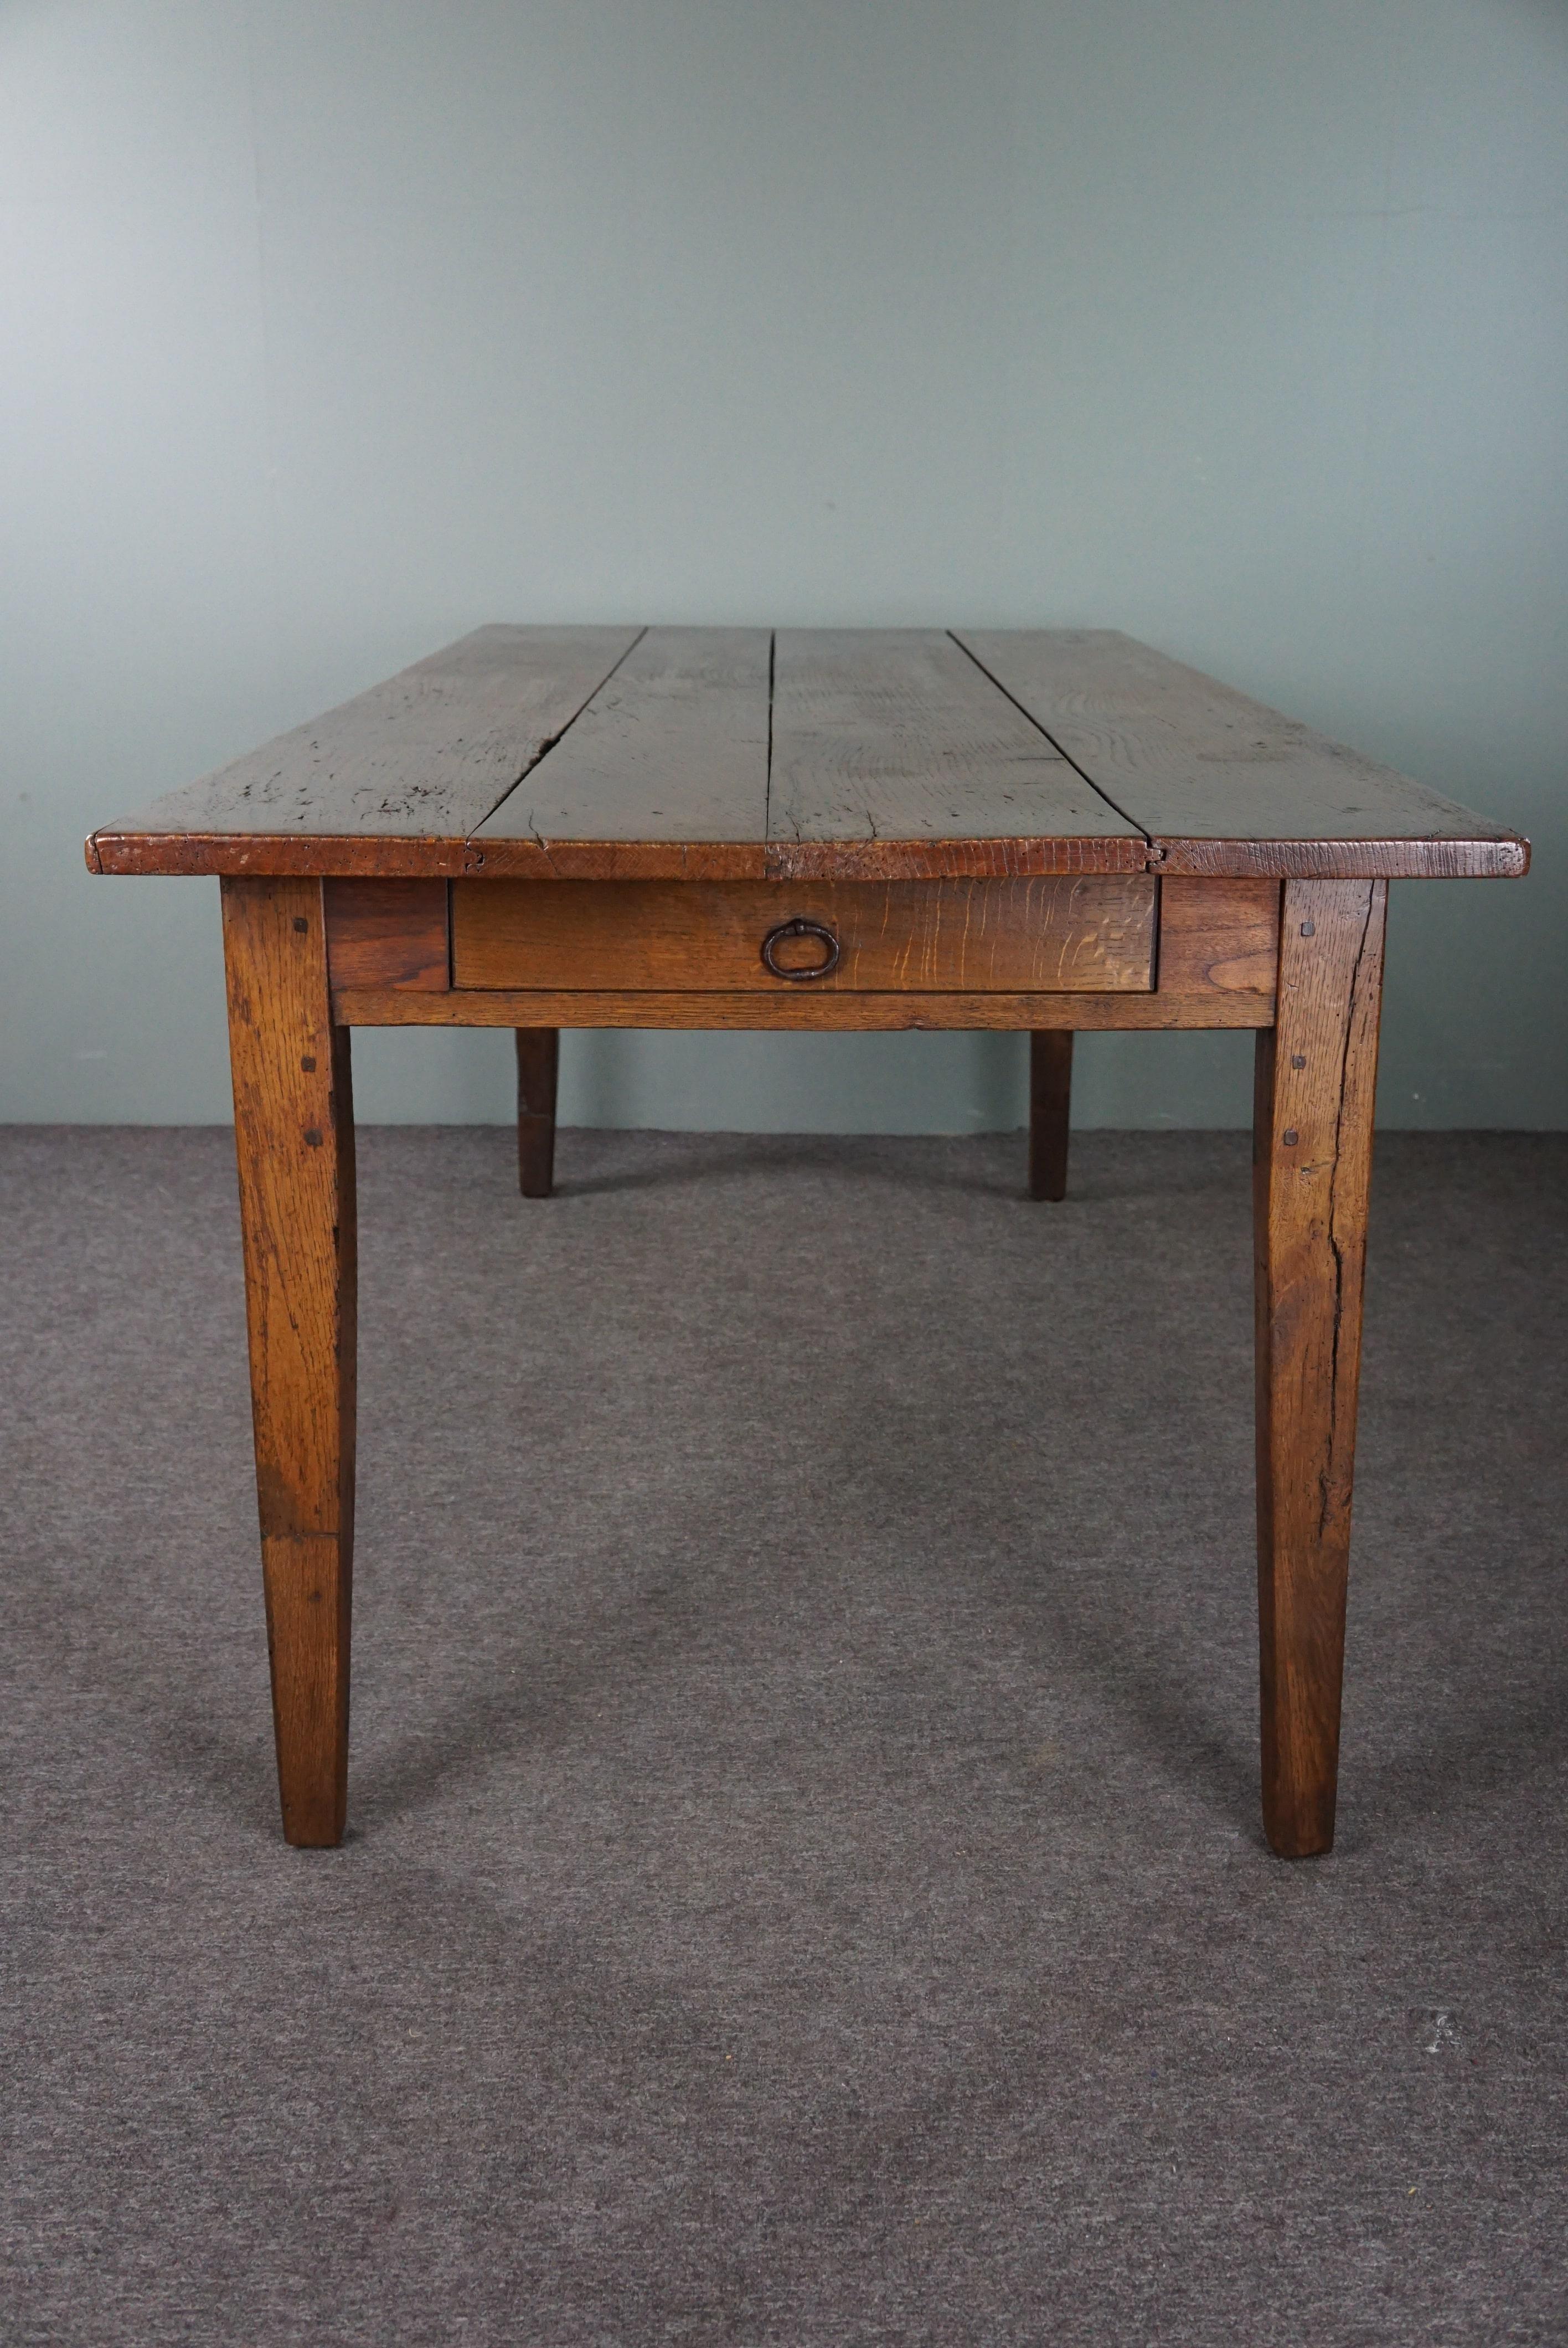 Early 19th Century French dining table dating back to the early 19th century with warm colors For Sale